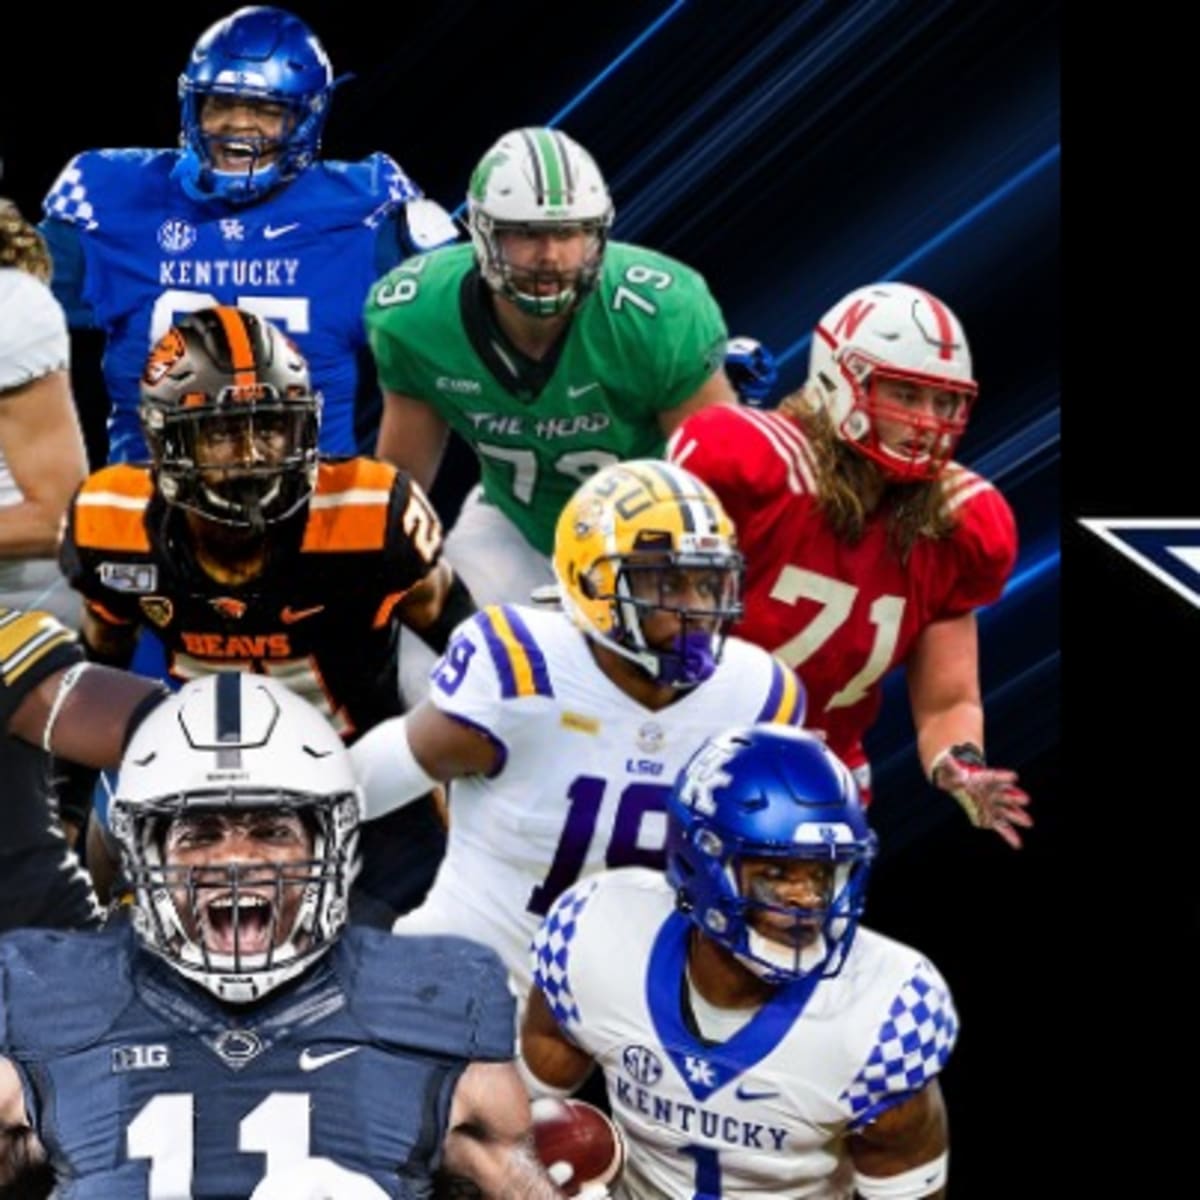 Dallas Cowboys Open Rookie Minicamp, Sign 4 NFL Draft Picks - FanNation  Dallas Cowboys News, Analysis and More